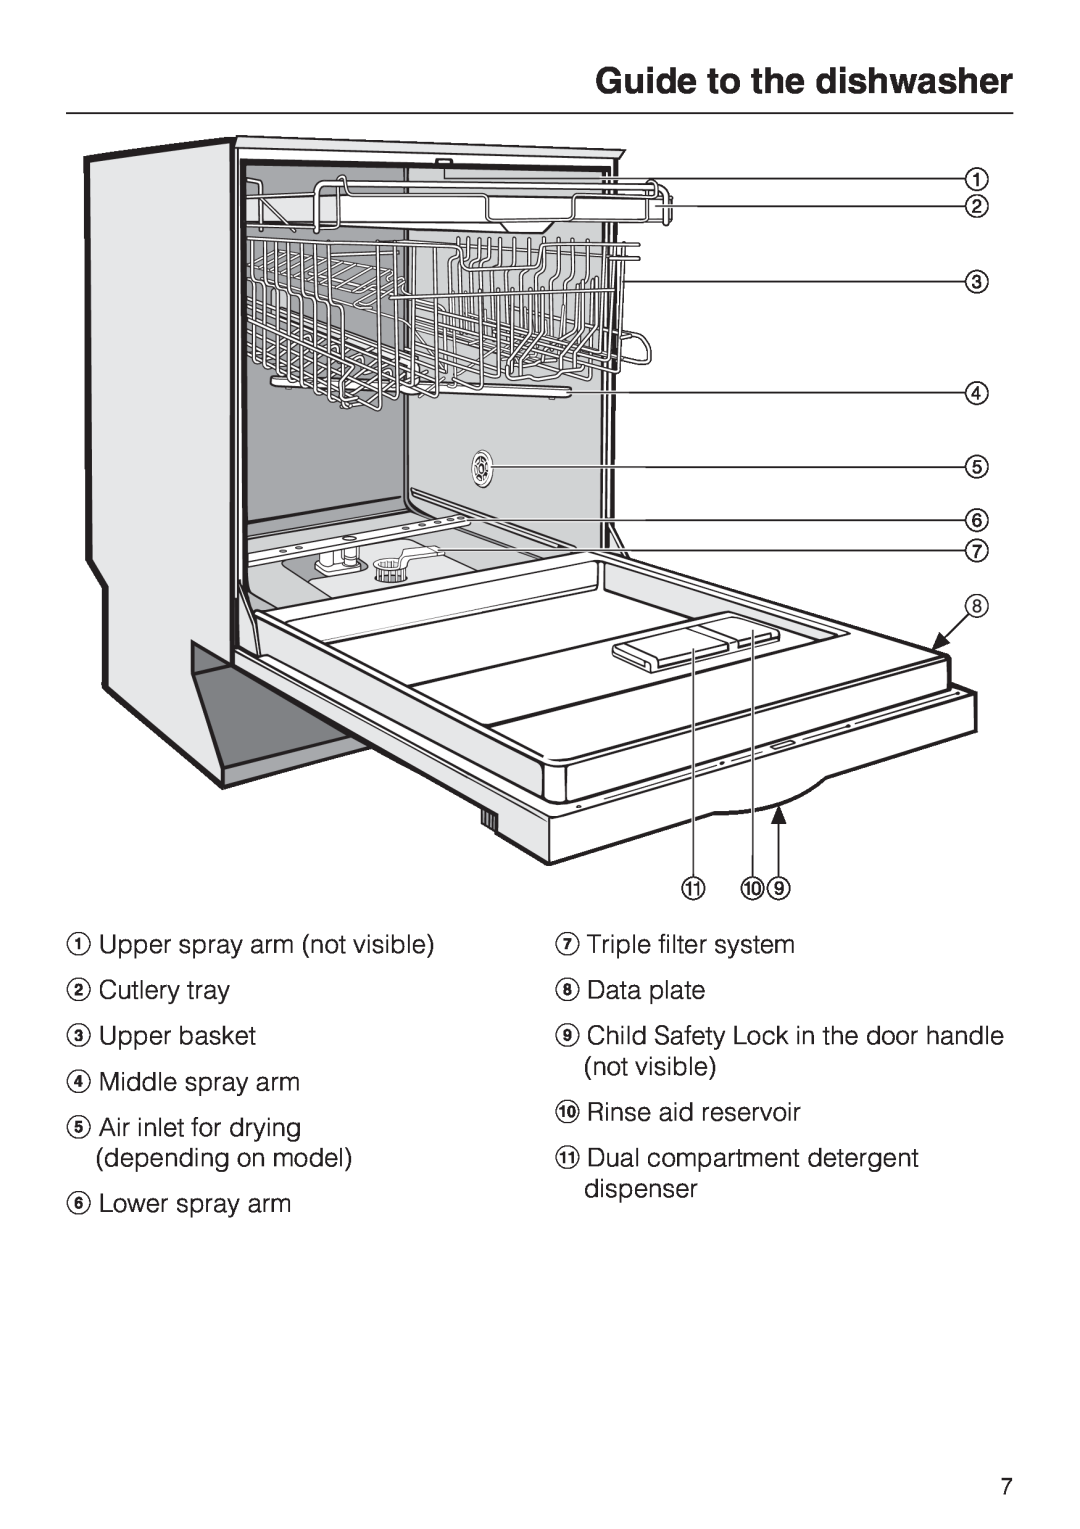 Miele G2142 Guide to the dishwasher, Upper spray arm not visible Cutlery tray, Upper basket Middle spray arm 